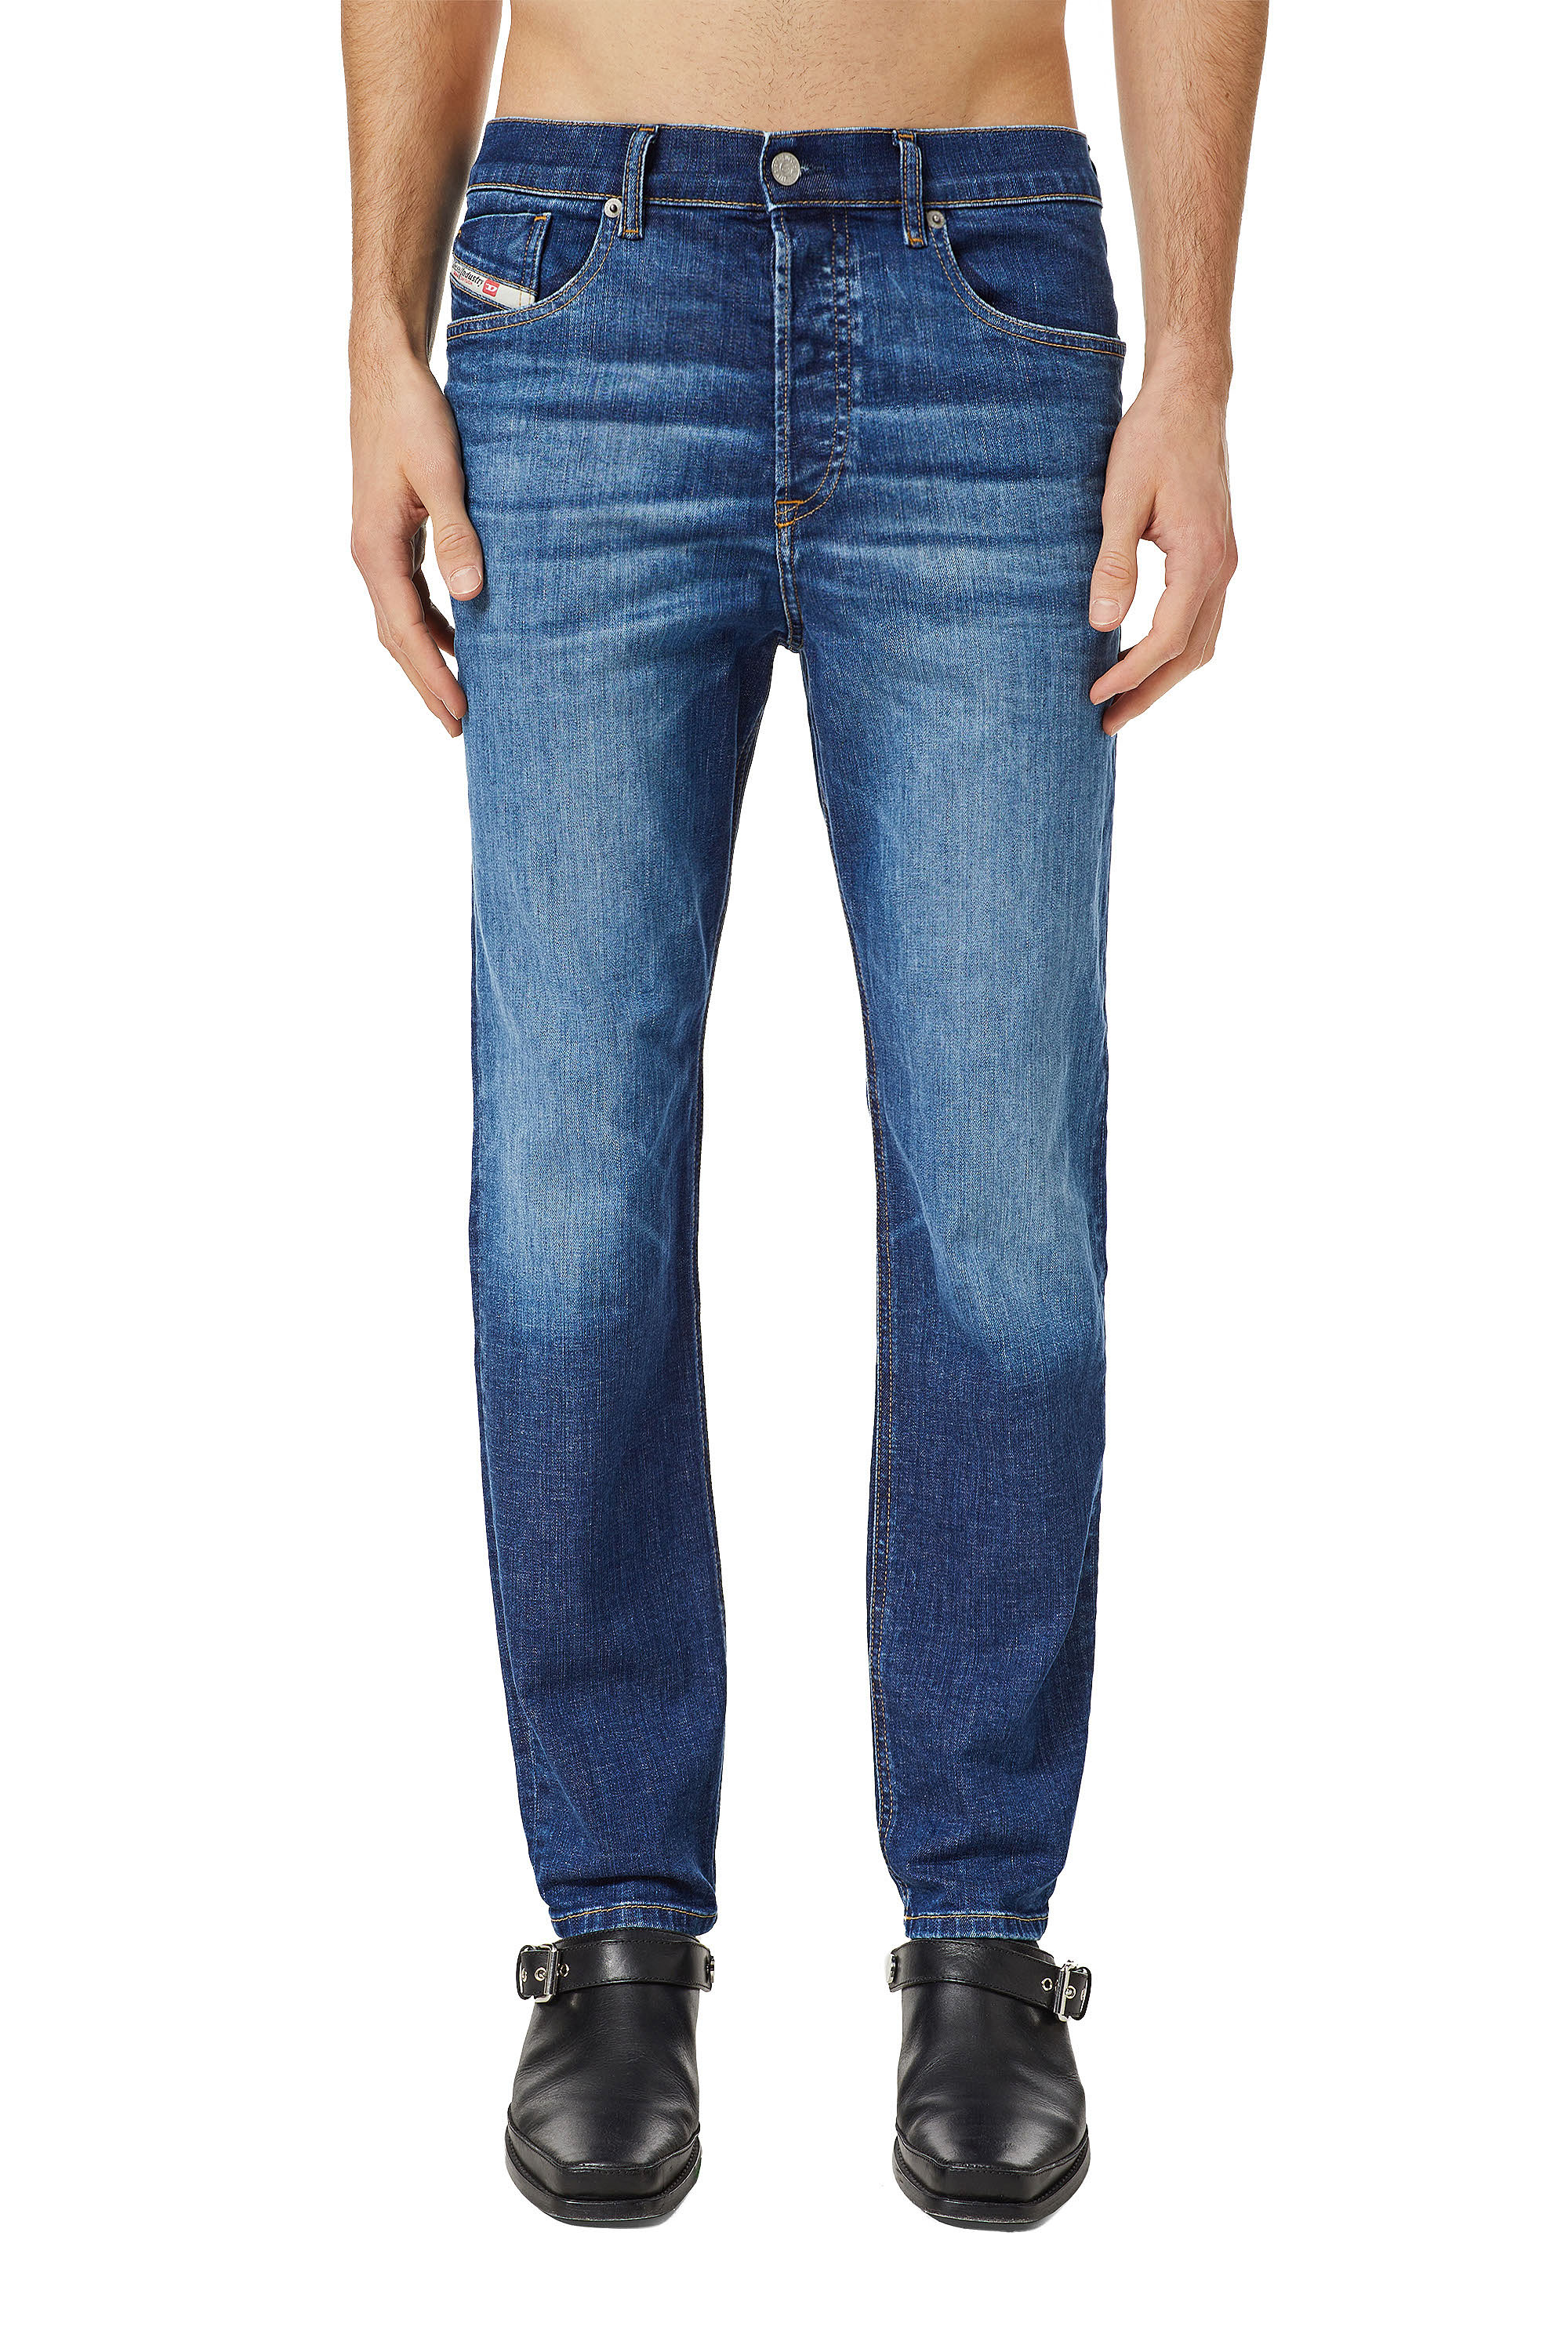 2005 D-FINING 09C72 Tapered Jeans, Medium blue - Jeans